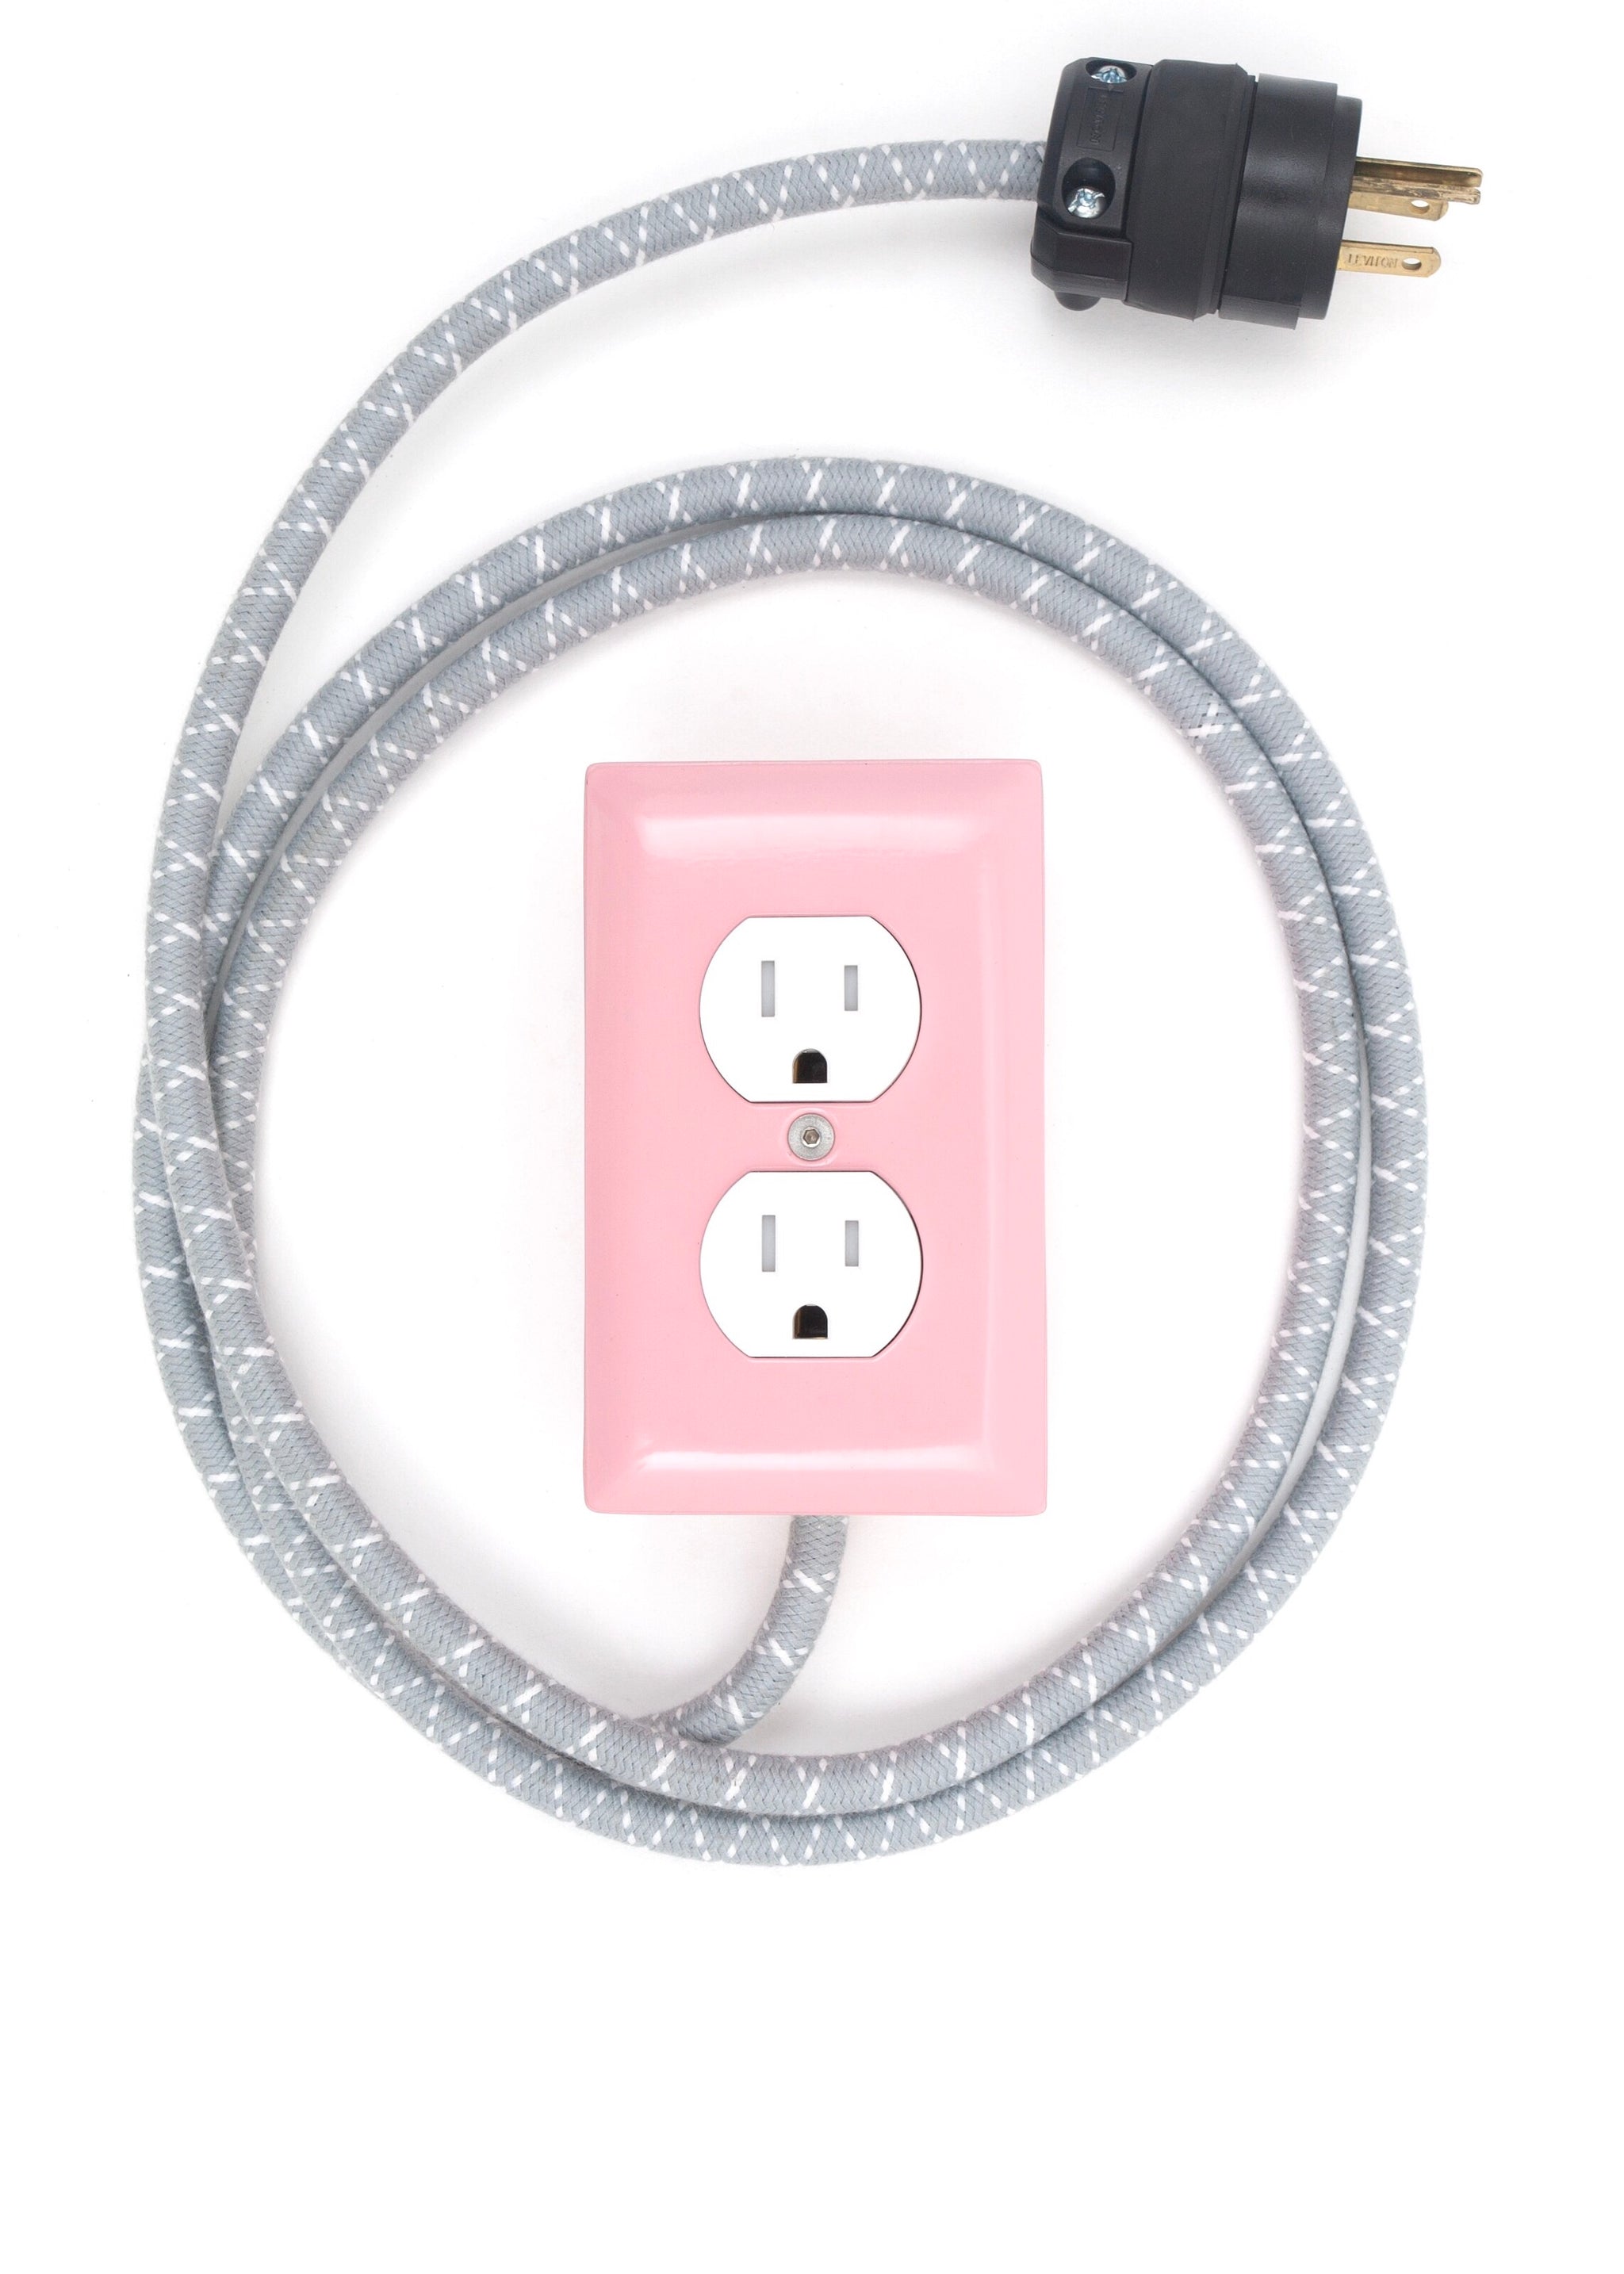 Extō Candy Pink Dual-Outlet Extension Cord for Nordstrom - A Modern Dual-Tamper-Resistant Outlet, 15-AMP Extension Cord